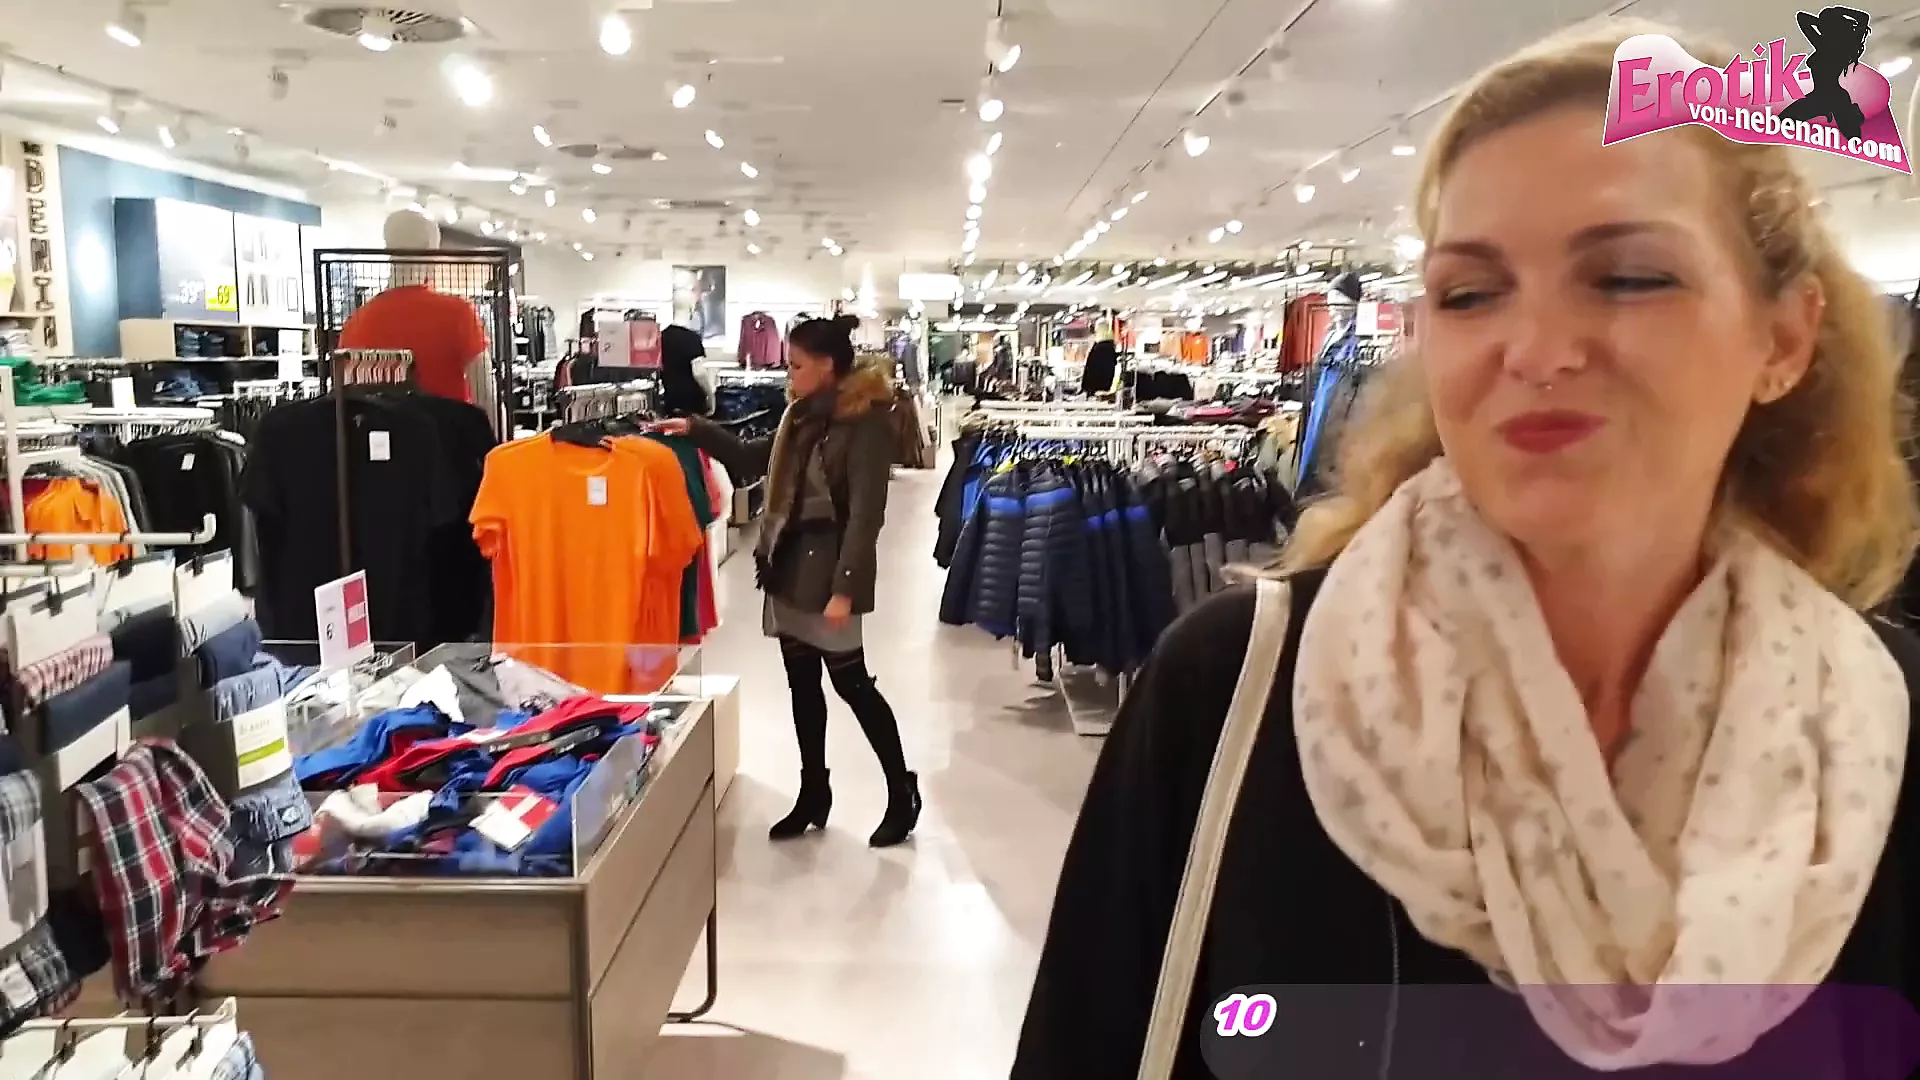 In Shoping Mall Doing Sex Pron - THREESOME CUM WALK IN SHOPPING CENTER AFTER Changing room | xHamster